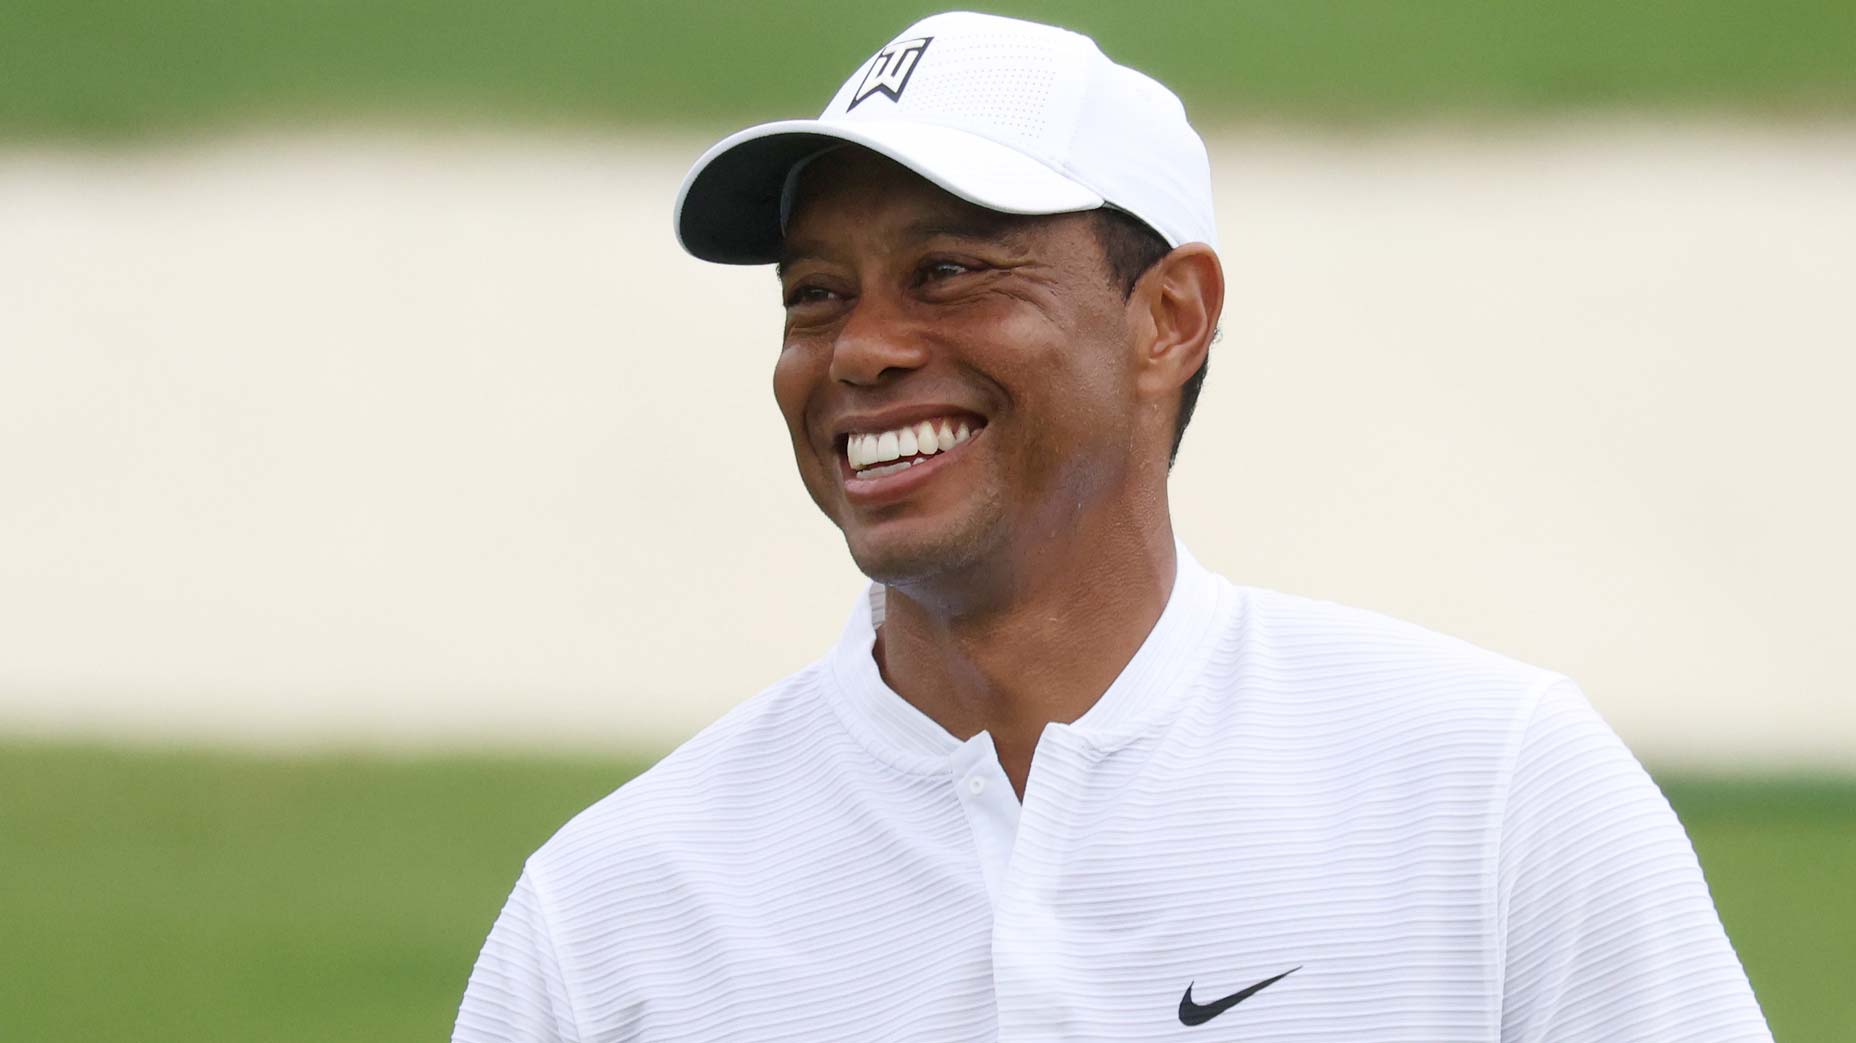 Tiger Woods’ projected career earnings are more than you might think